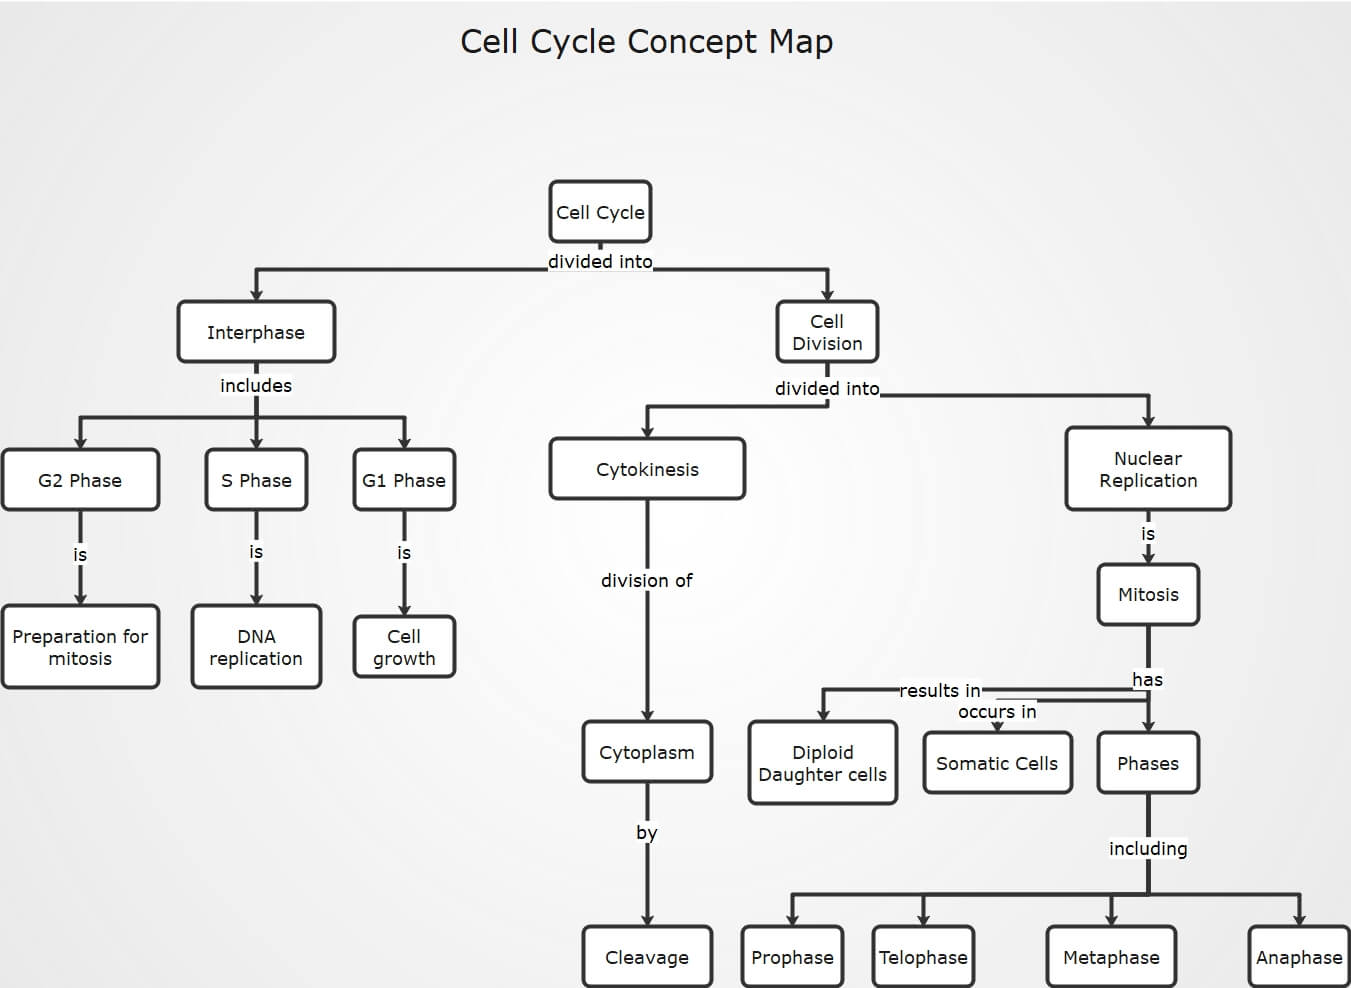 Cell Cycle Concept Map